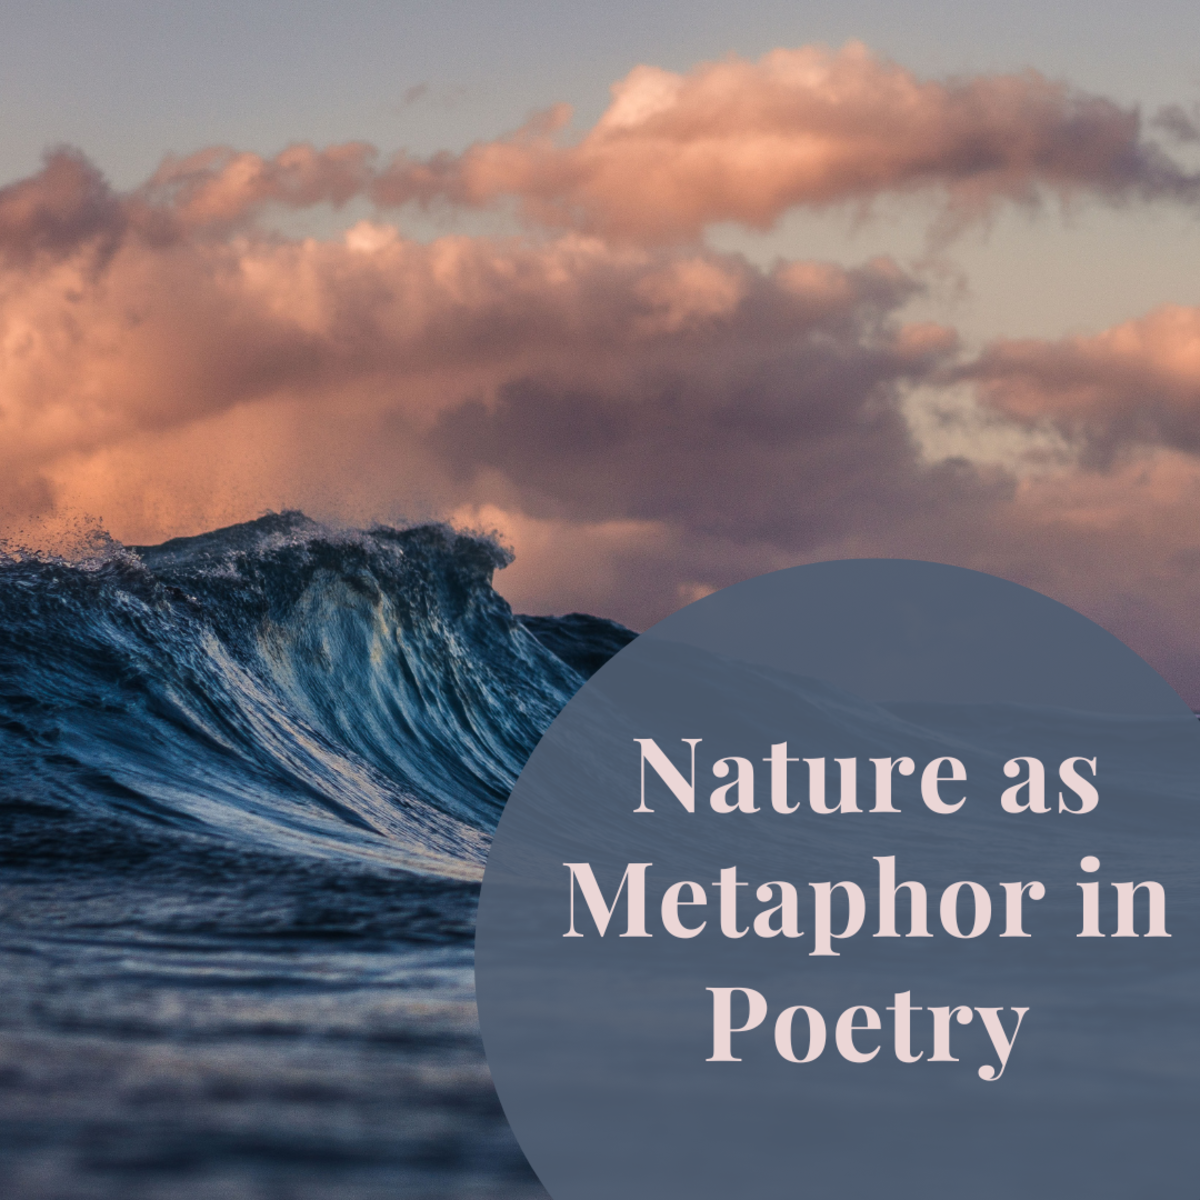 Poetry of Nature: How Physical Laws Are Represented in Metaphors